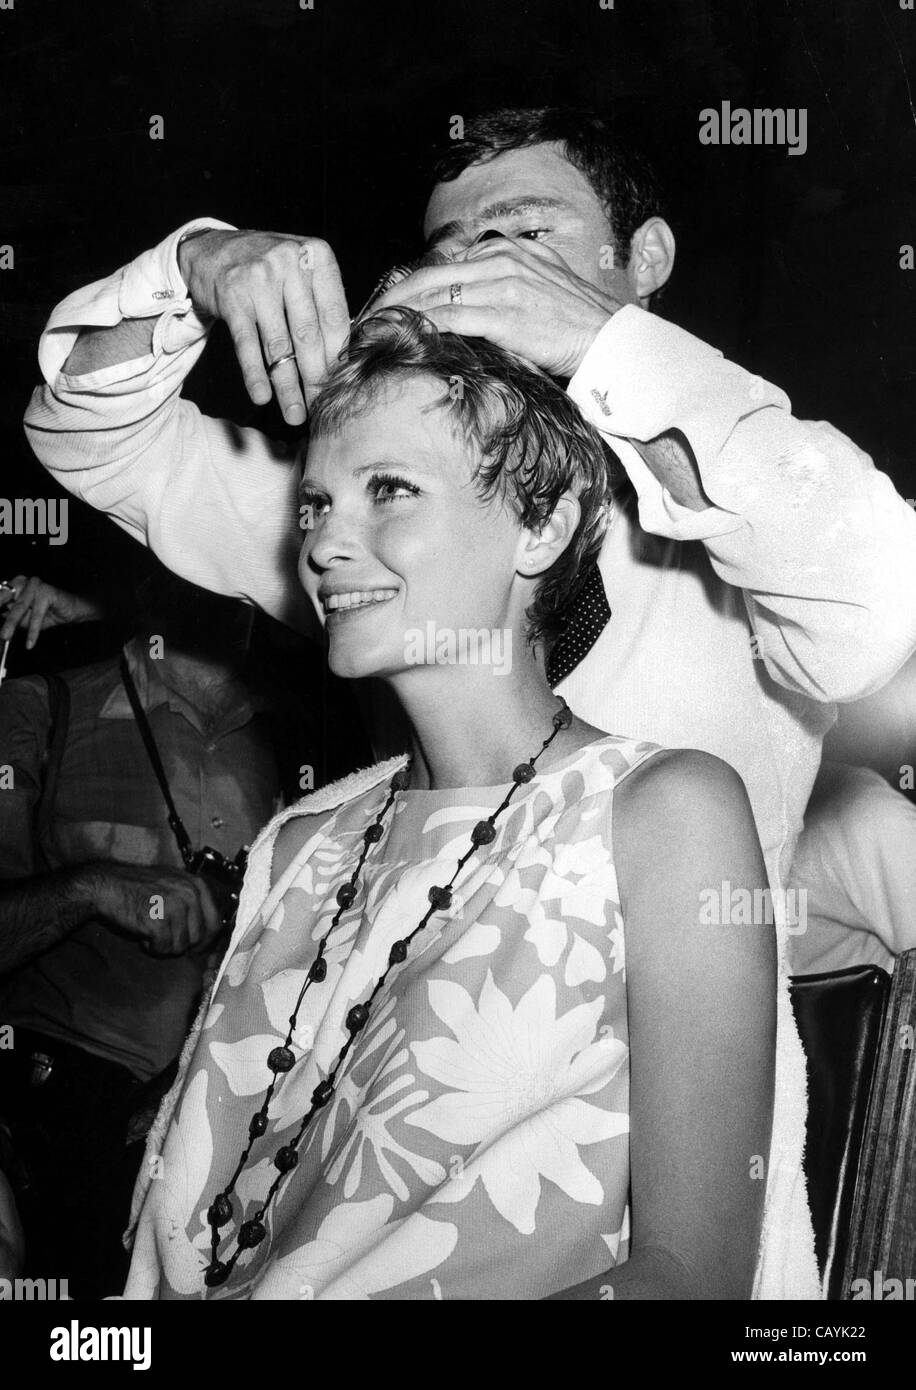 May 9, 2012 - Los Angeles, California, U.S. - Vidal Sassoon, the celebrity hairstylist known for his simple geometric hairstyles and 'wash and wear' cuts died at his Los Angeles home. He was 84.  PICTURED: May 1, 2003 - VIDAL SASSOON cuts MIA FARROW'S hair for her role in rosemary's baby. (Credit Im Stock Photo